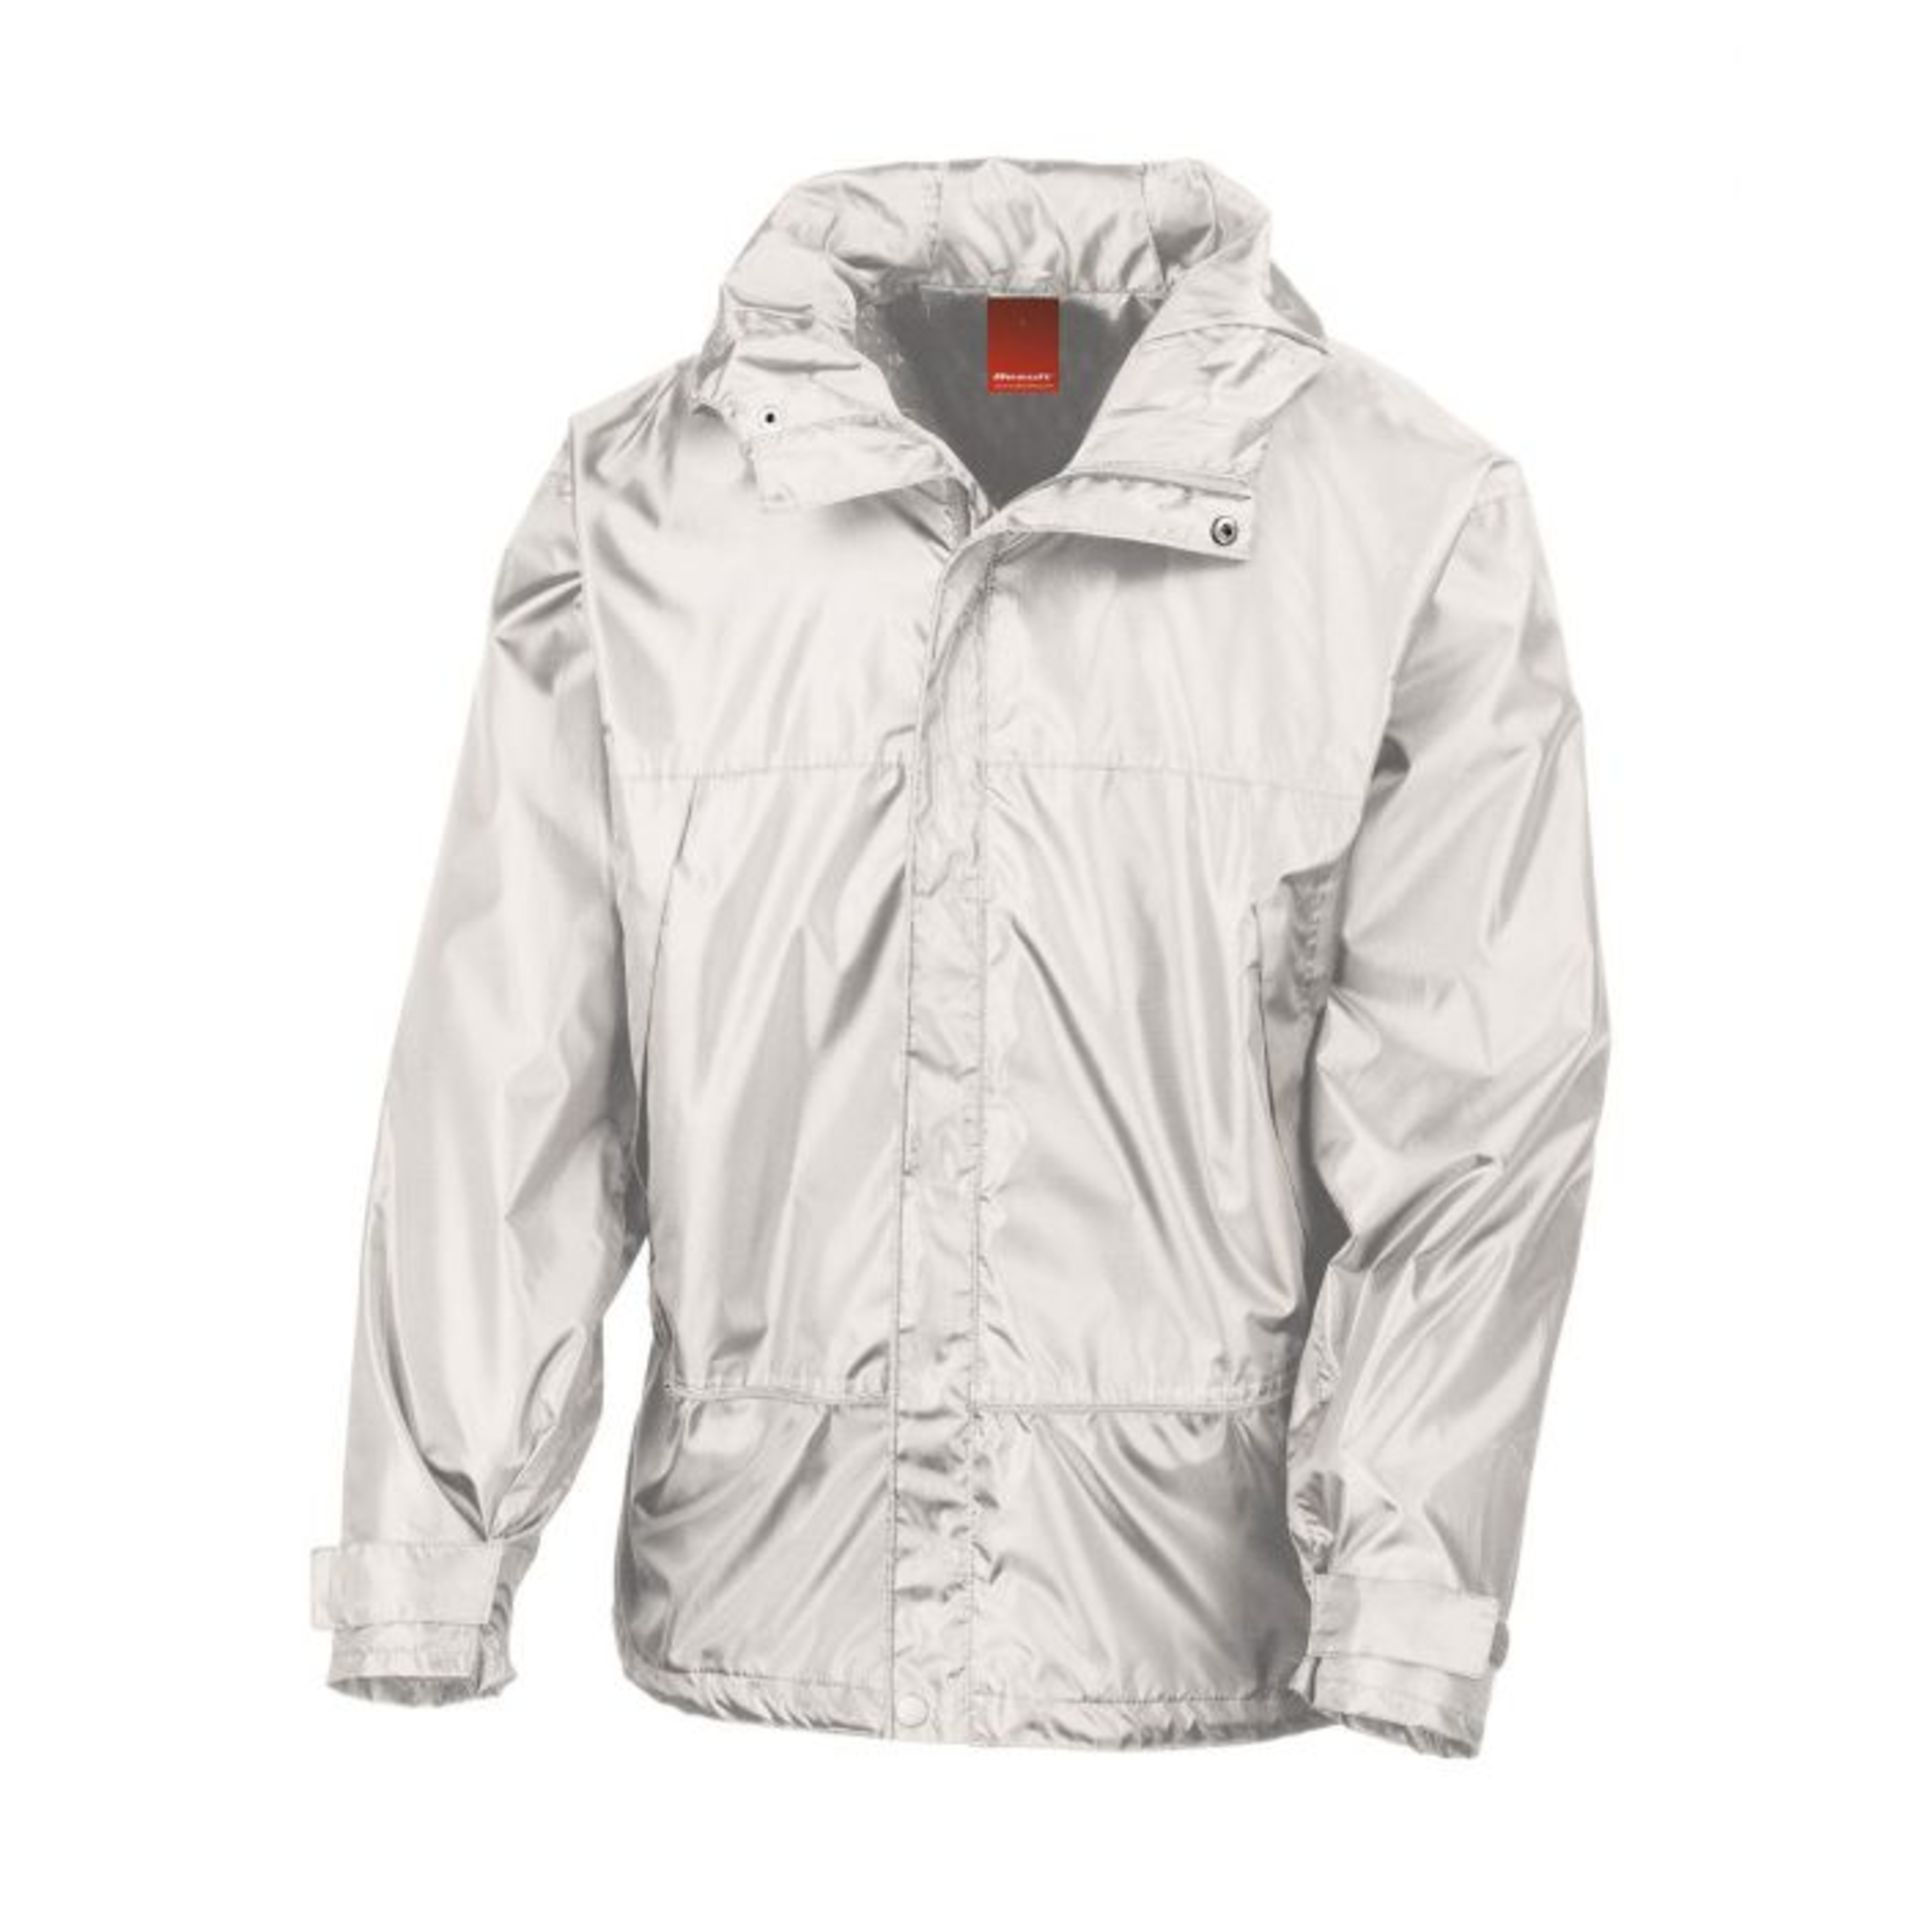 (12) BOX LOT TO INCLUDE 10 ITEMS: 1X Result Seneca Unisex Weatherproof Jacket R98X [Colour: - Image 7 of 7